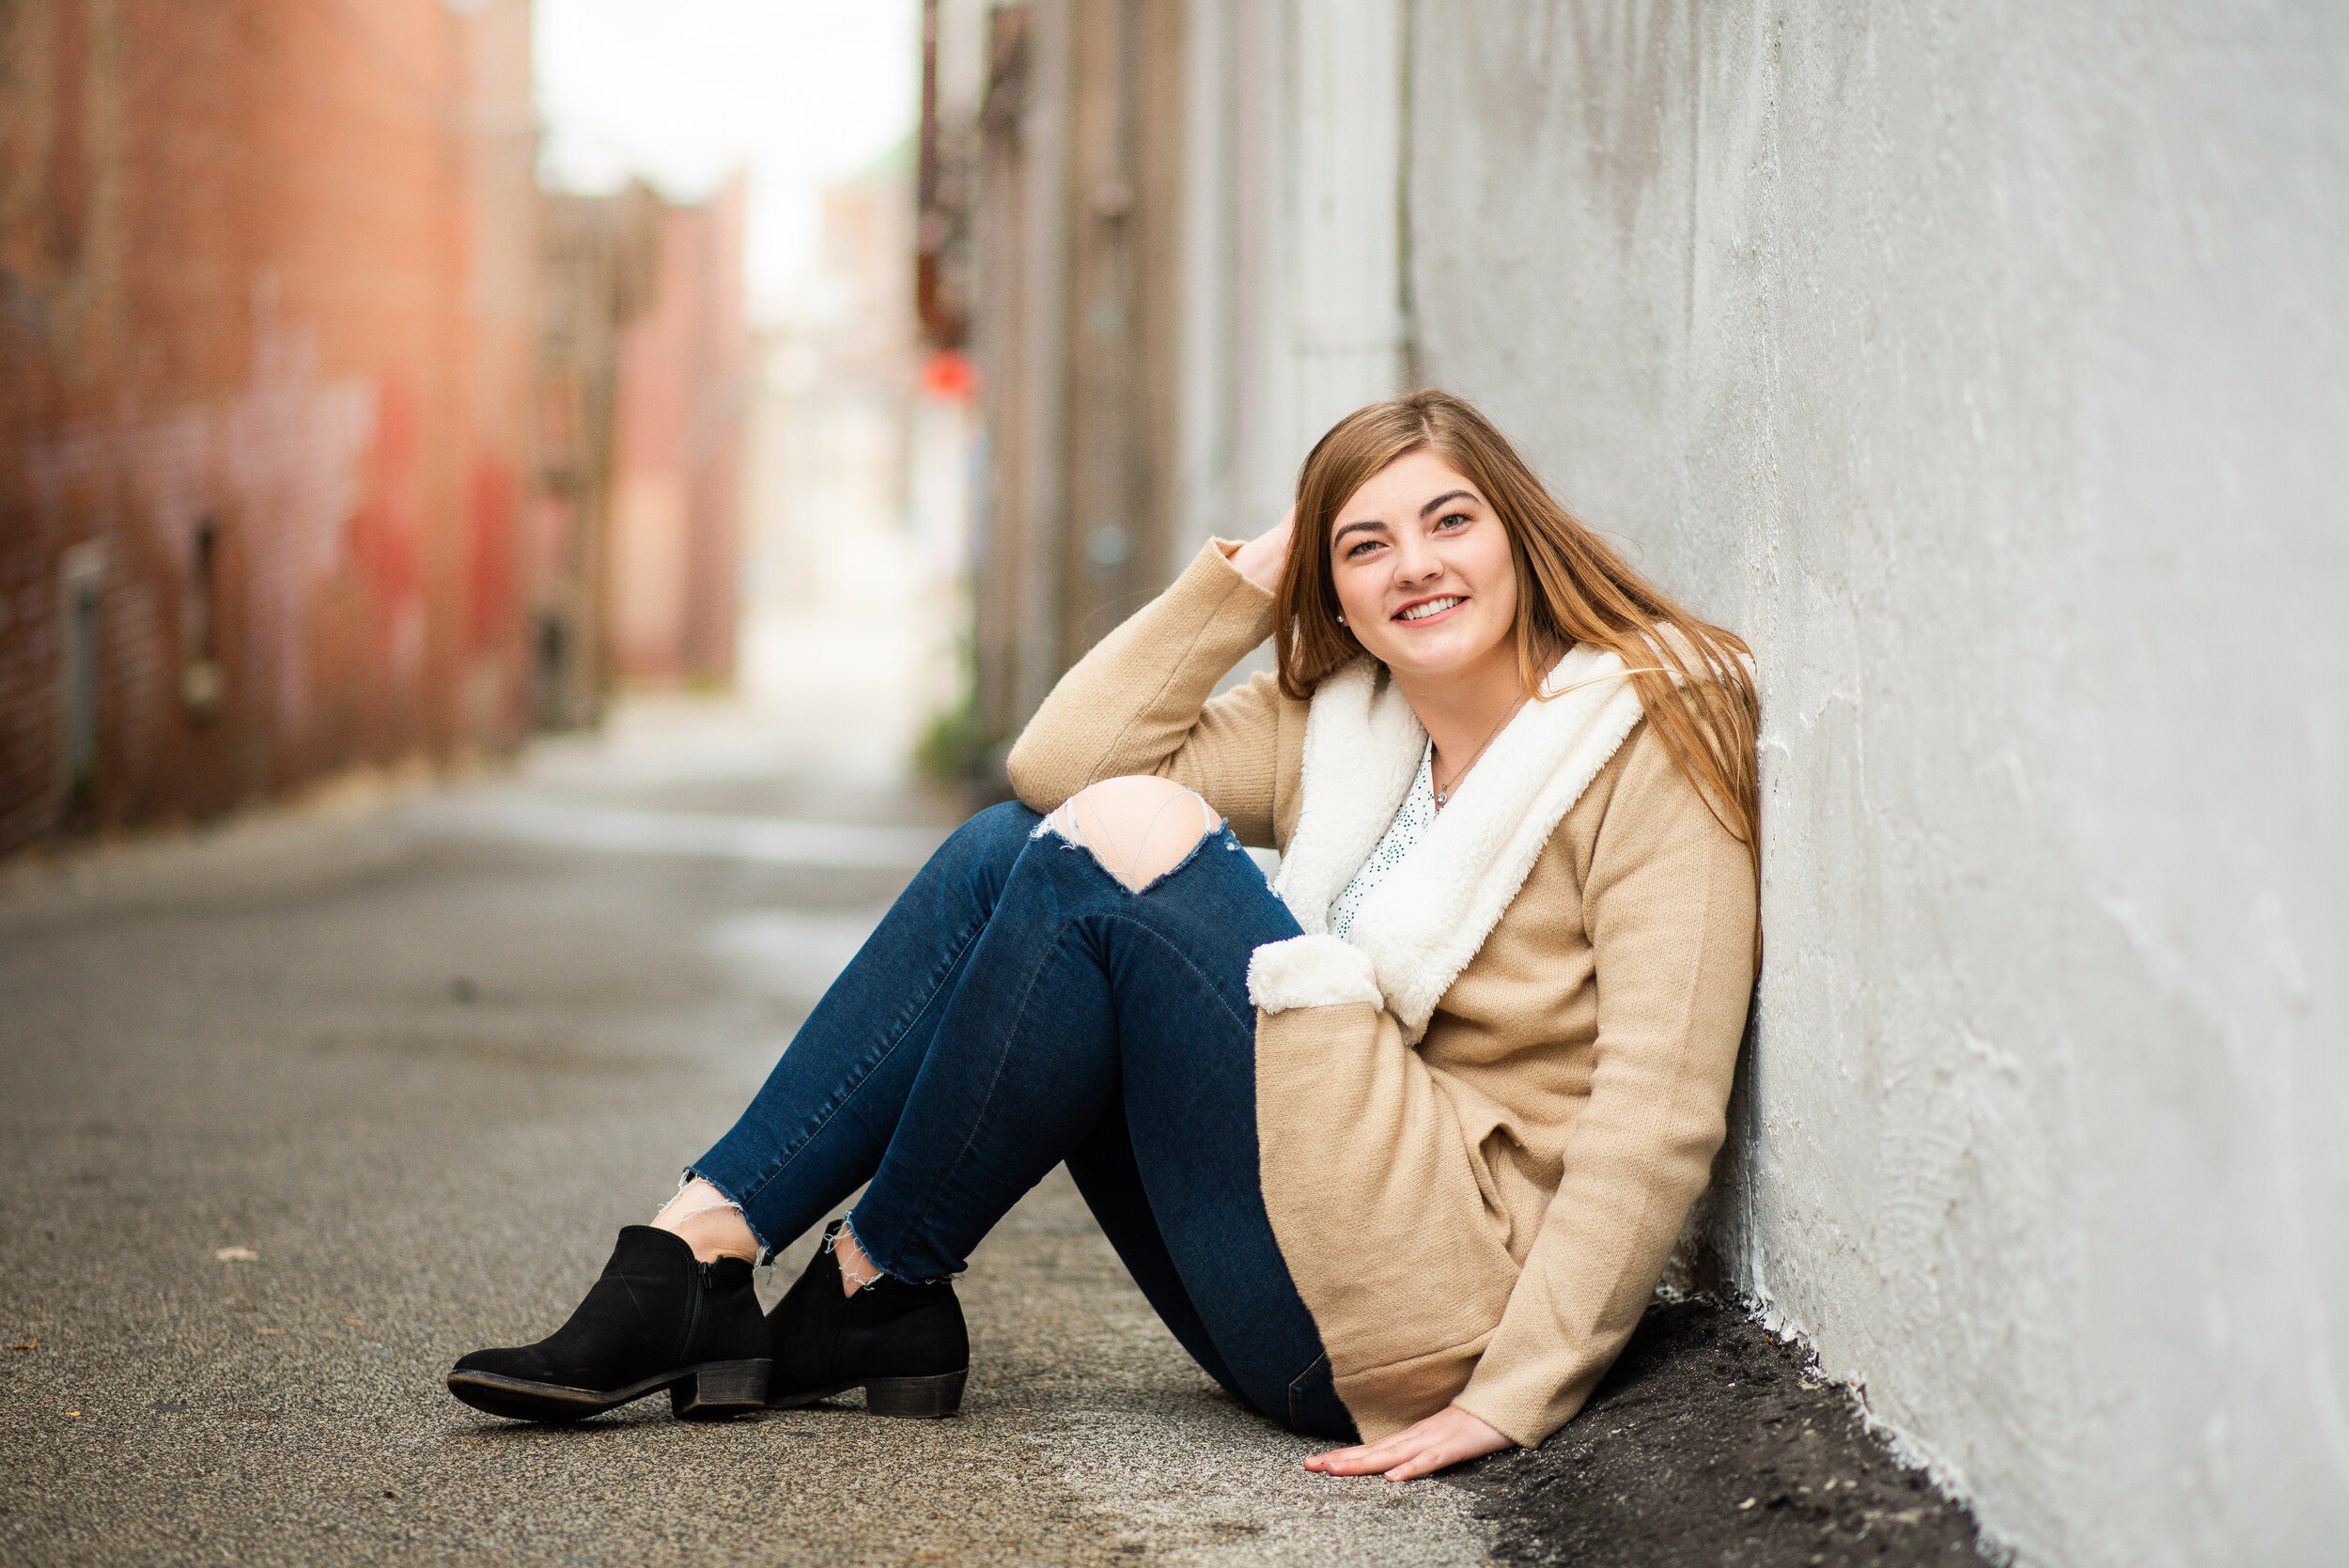  Bloomington Normal IL Senior Photography Session Locations 